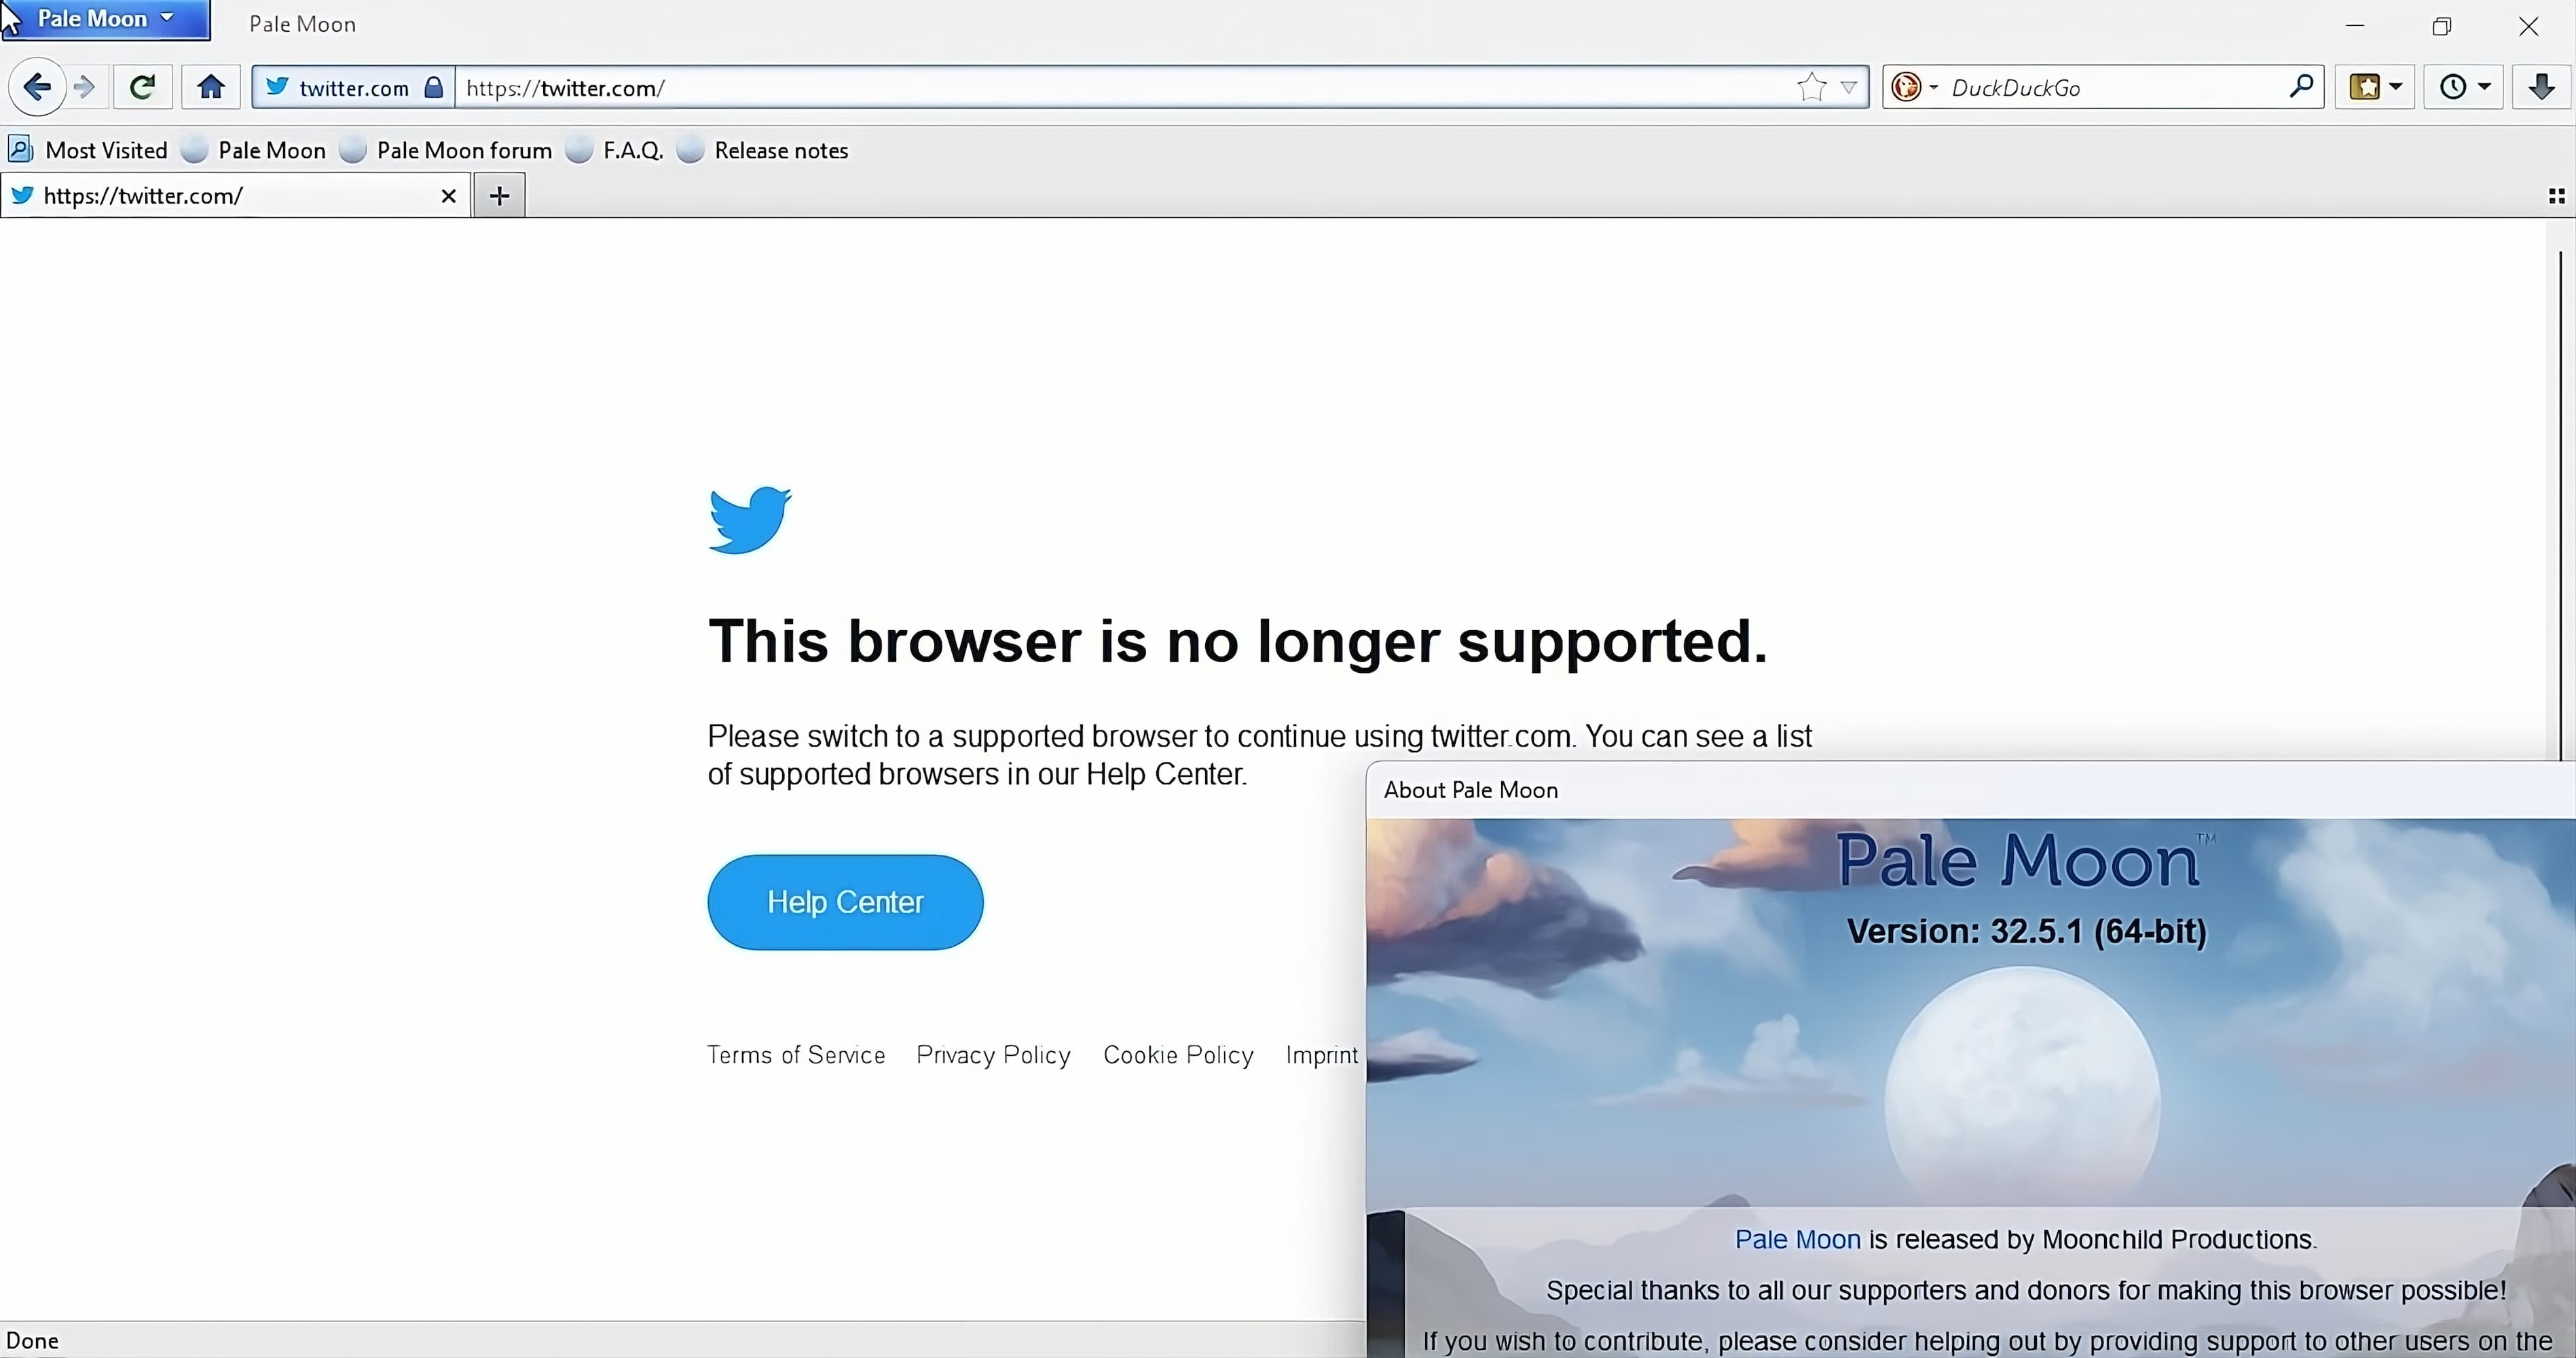 X (Twitter) drops support for Pale Moon, but you can still use it